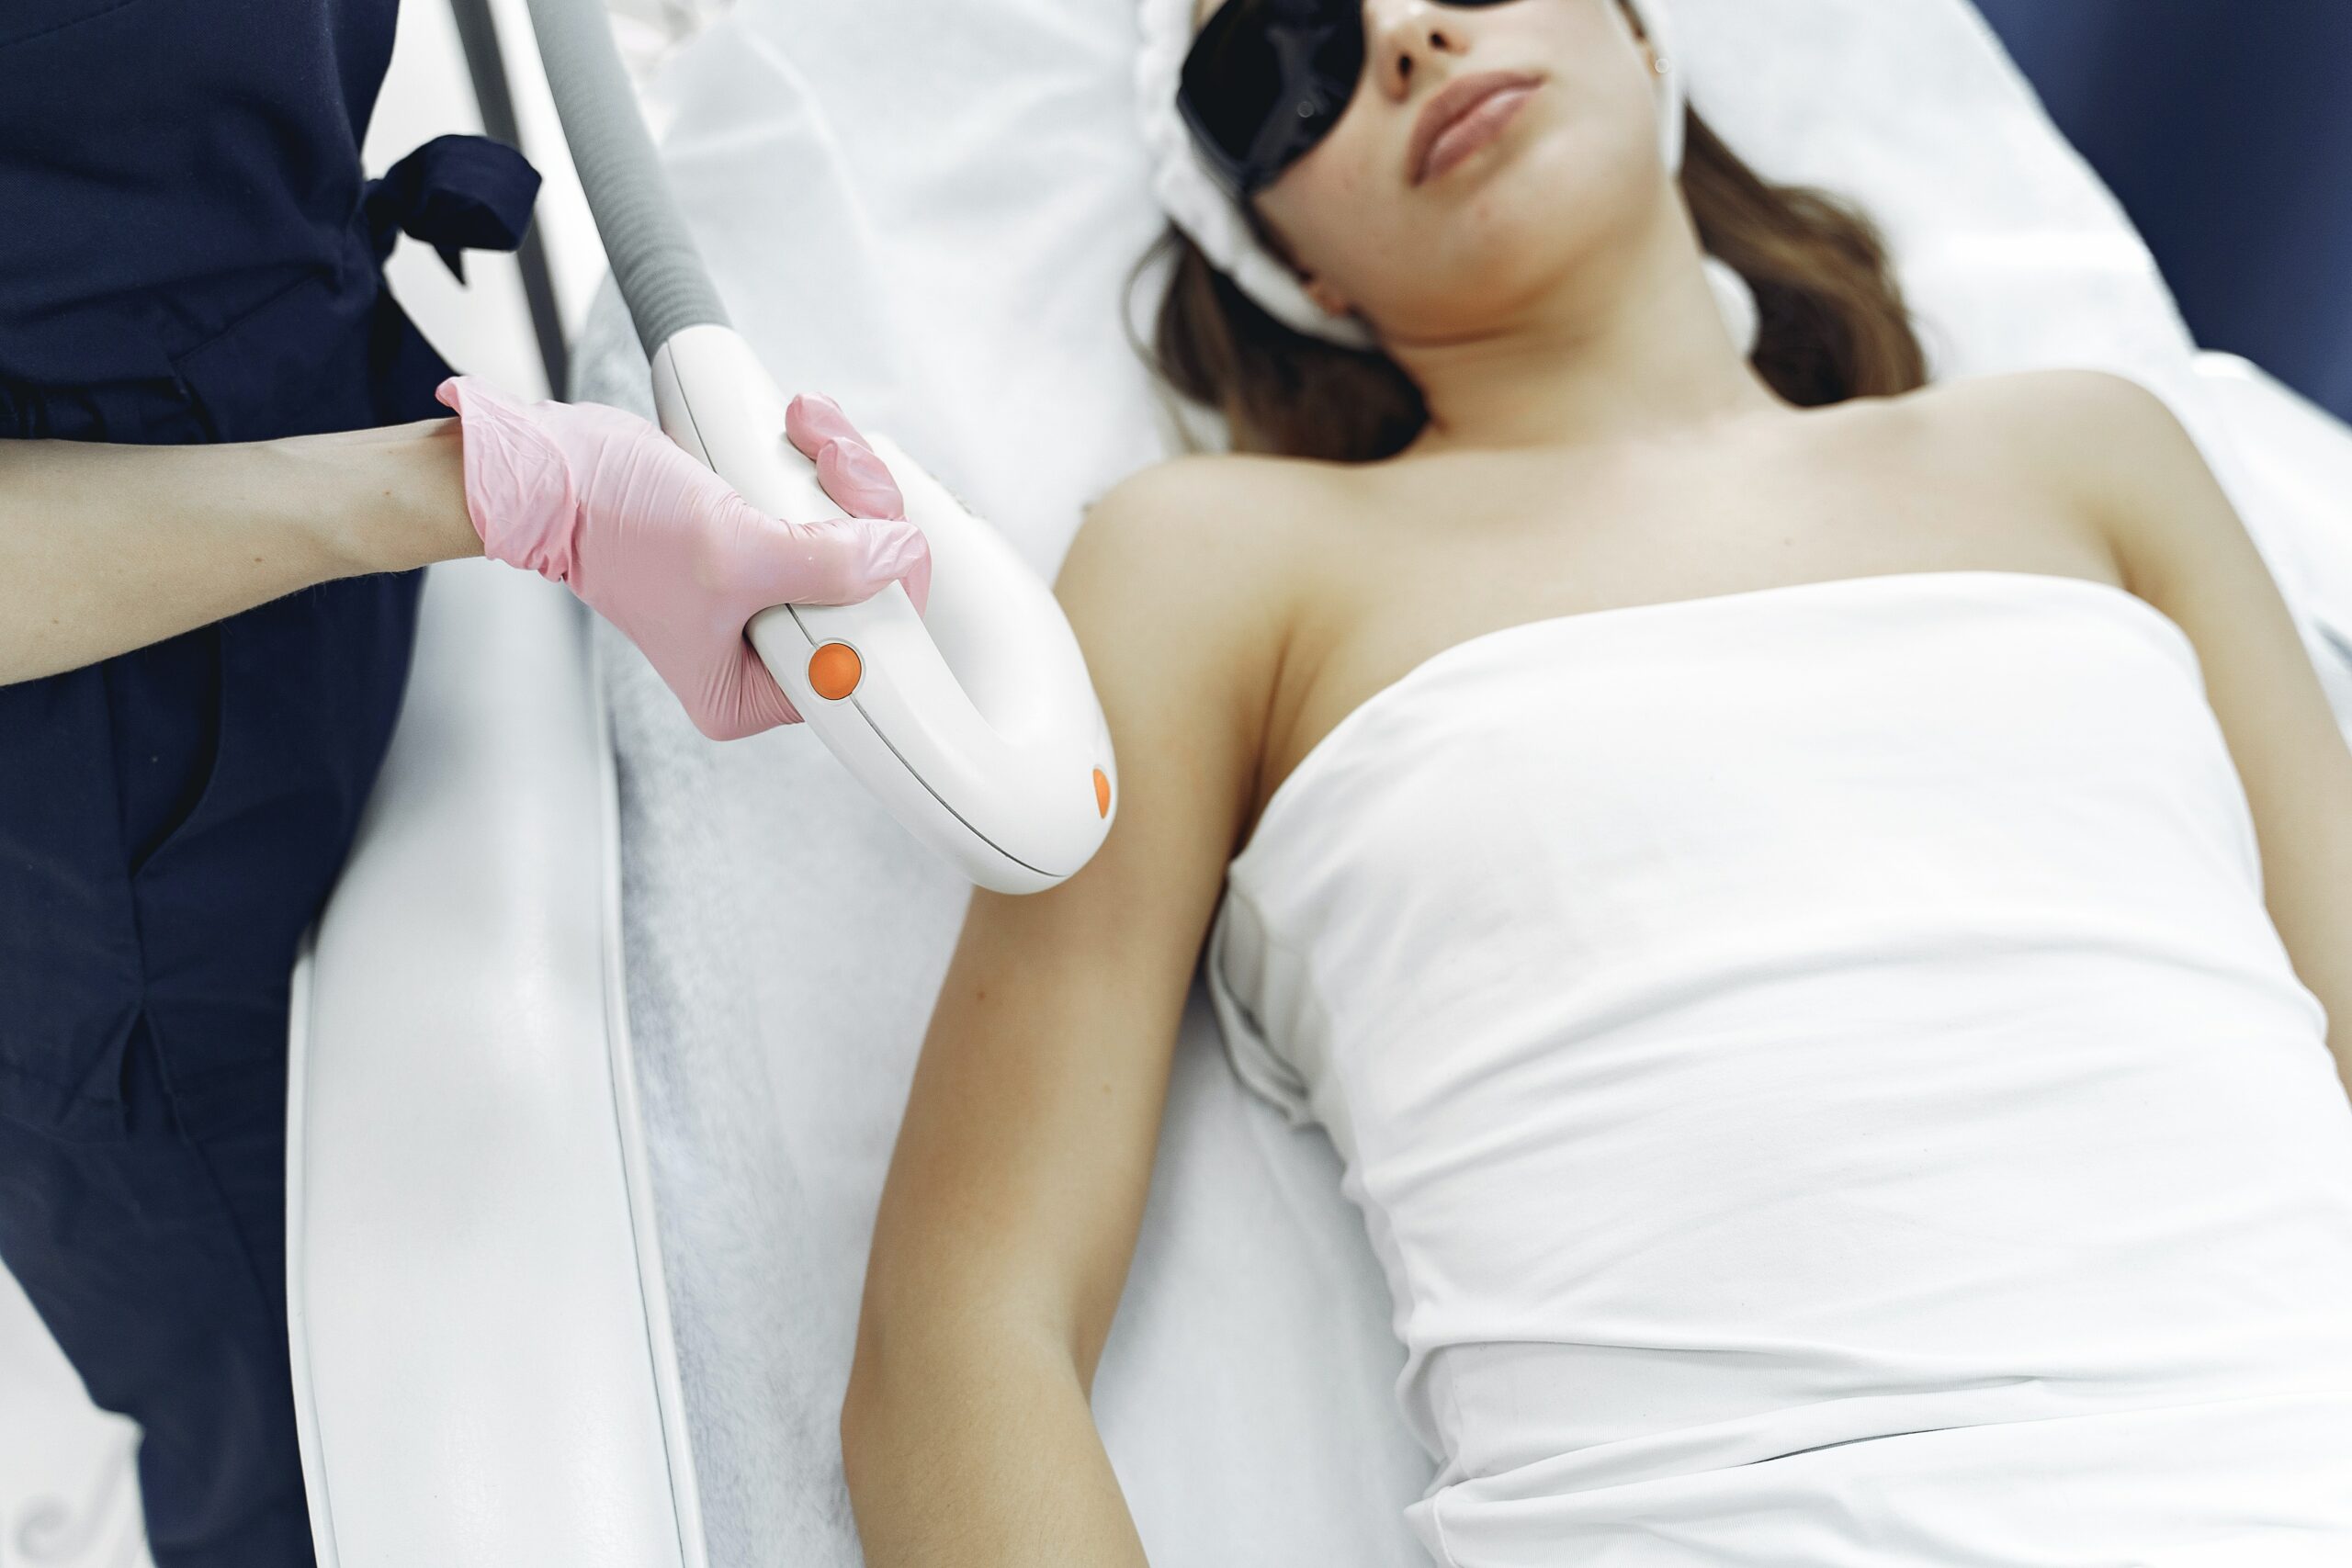 Essential Factors to Consider While Choosing a Laser Spa